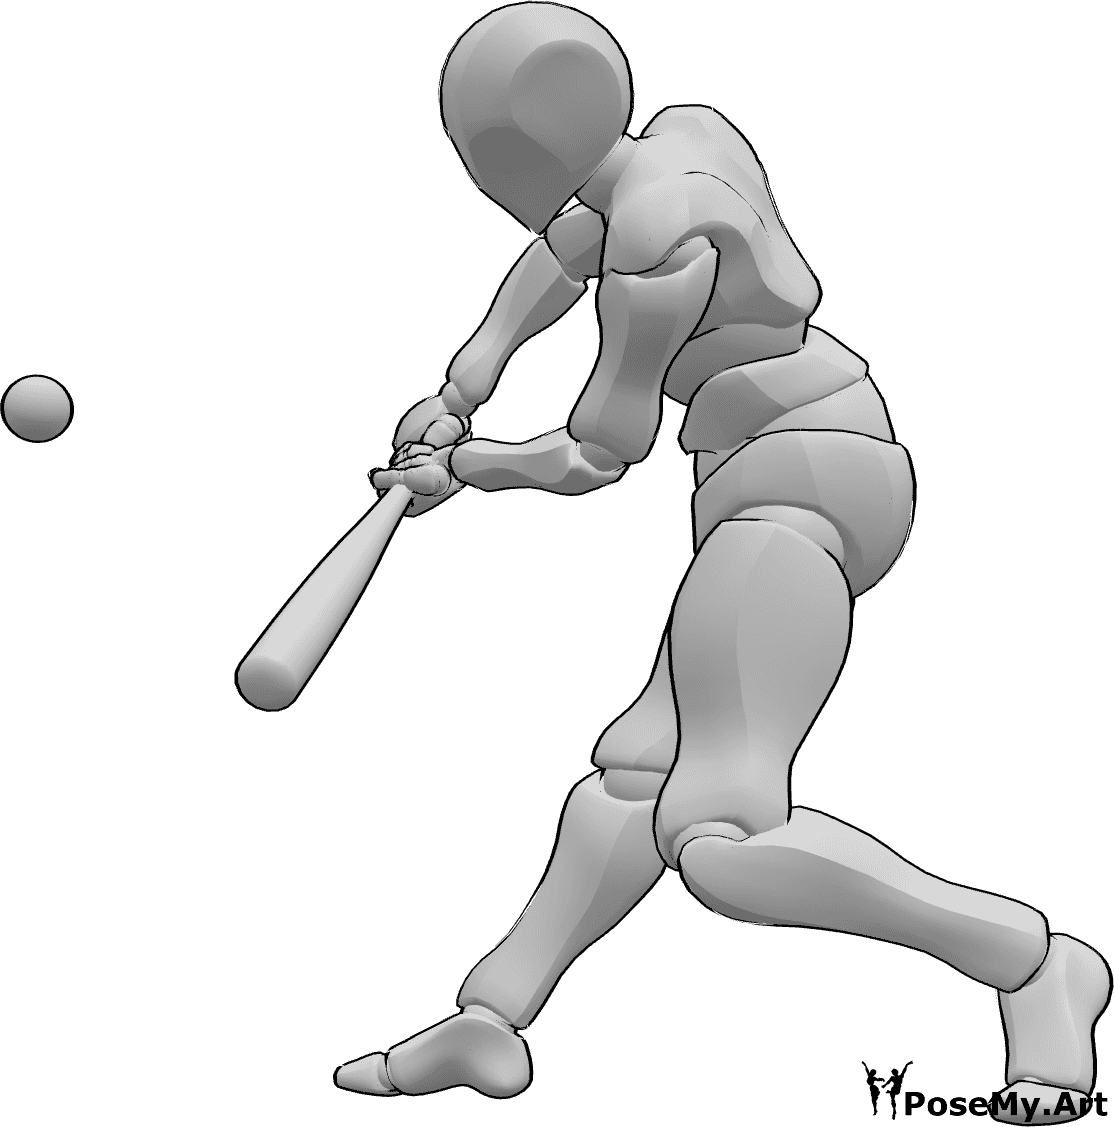 Pose Reference - Hitting low ball pose - Male baseball player is standing and hitting a low ball